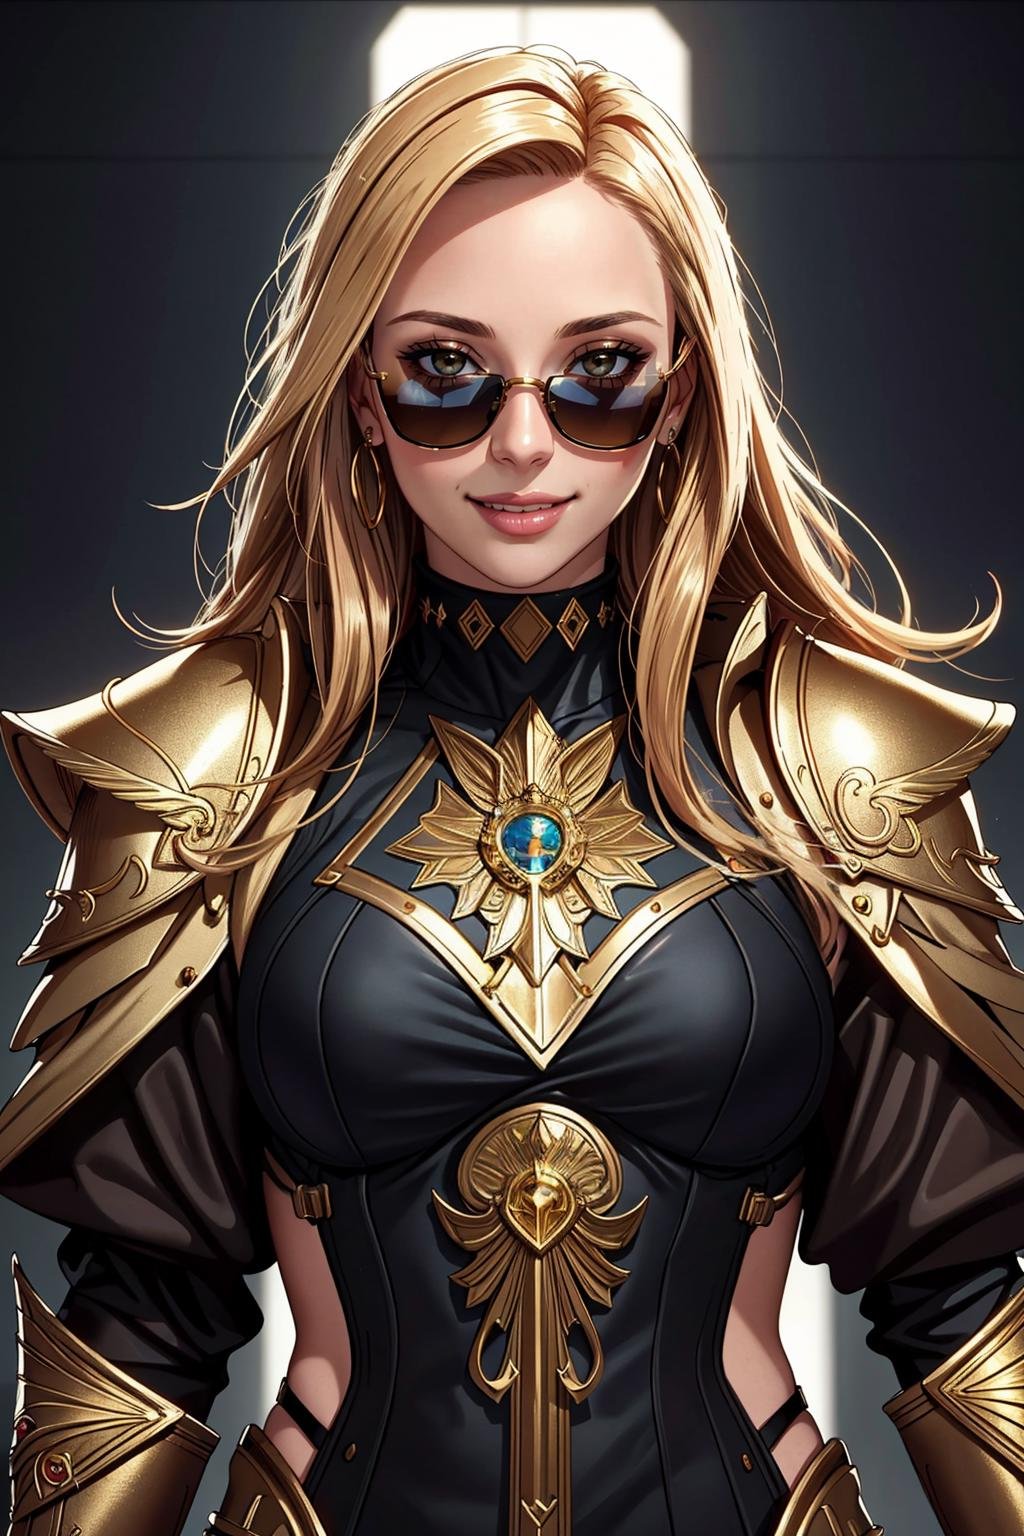 ((Masterpiece, best quality,edgQuality)),smiling,excited,full bodyedgGolden, a woman dressed in golden armor ,wearing edgGoldenBlonde Nadia with (sunglasses and a choker)<lora:Ultimate_Nadia:0.5> <lora:edgNadiaGolden:0.8>